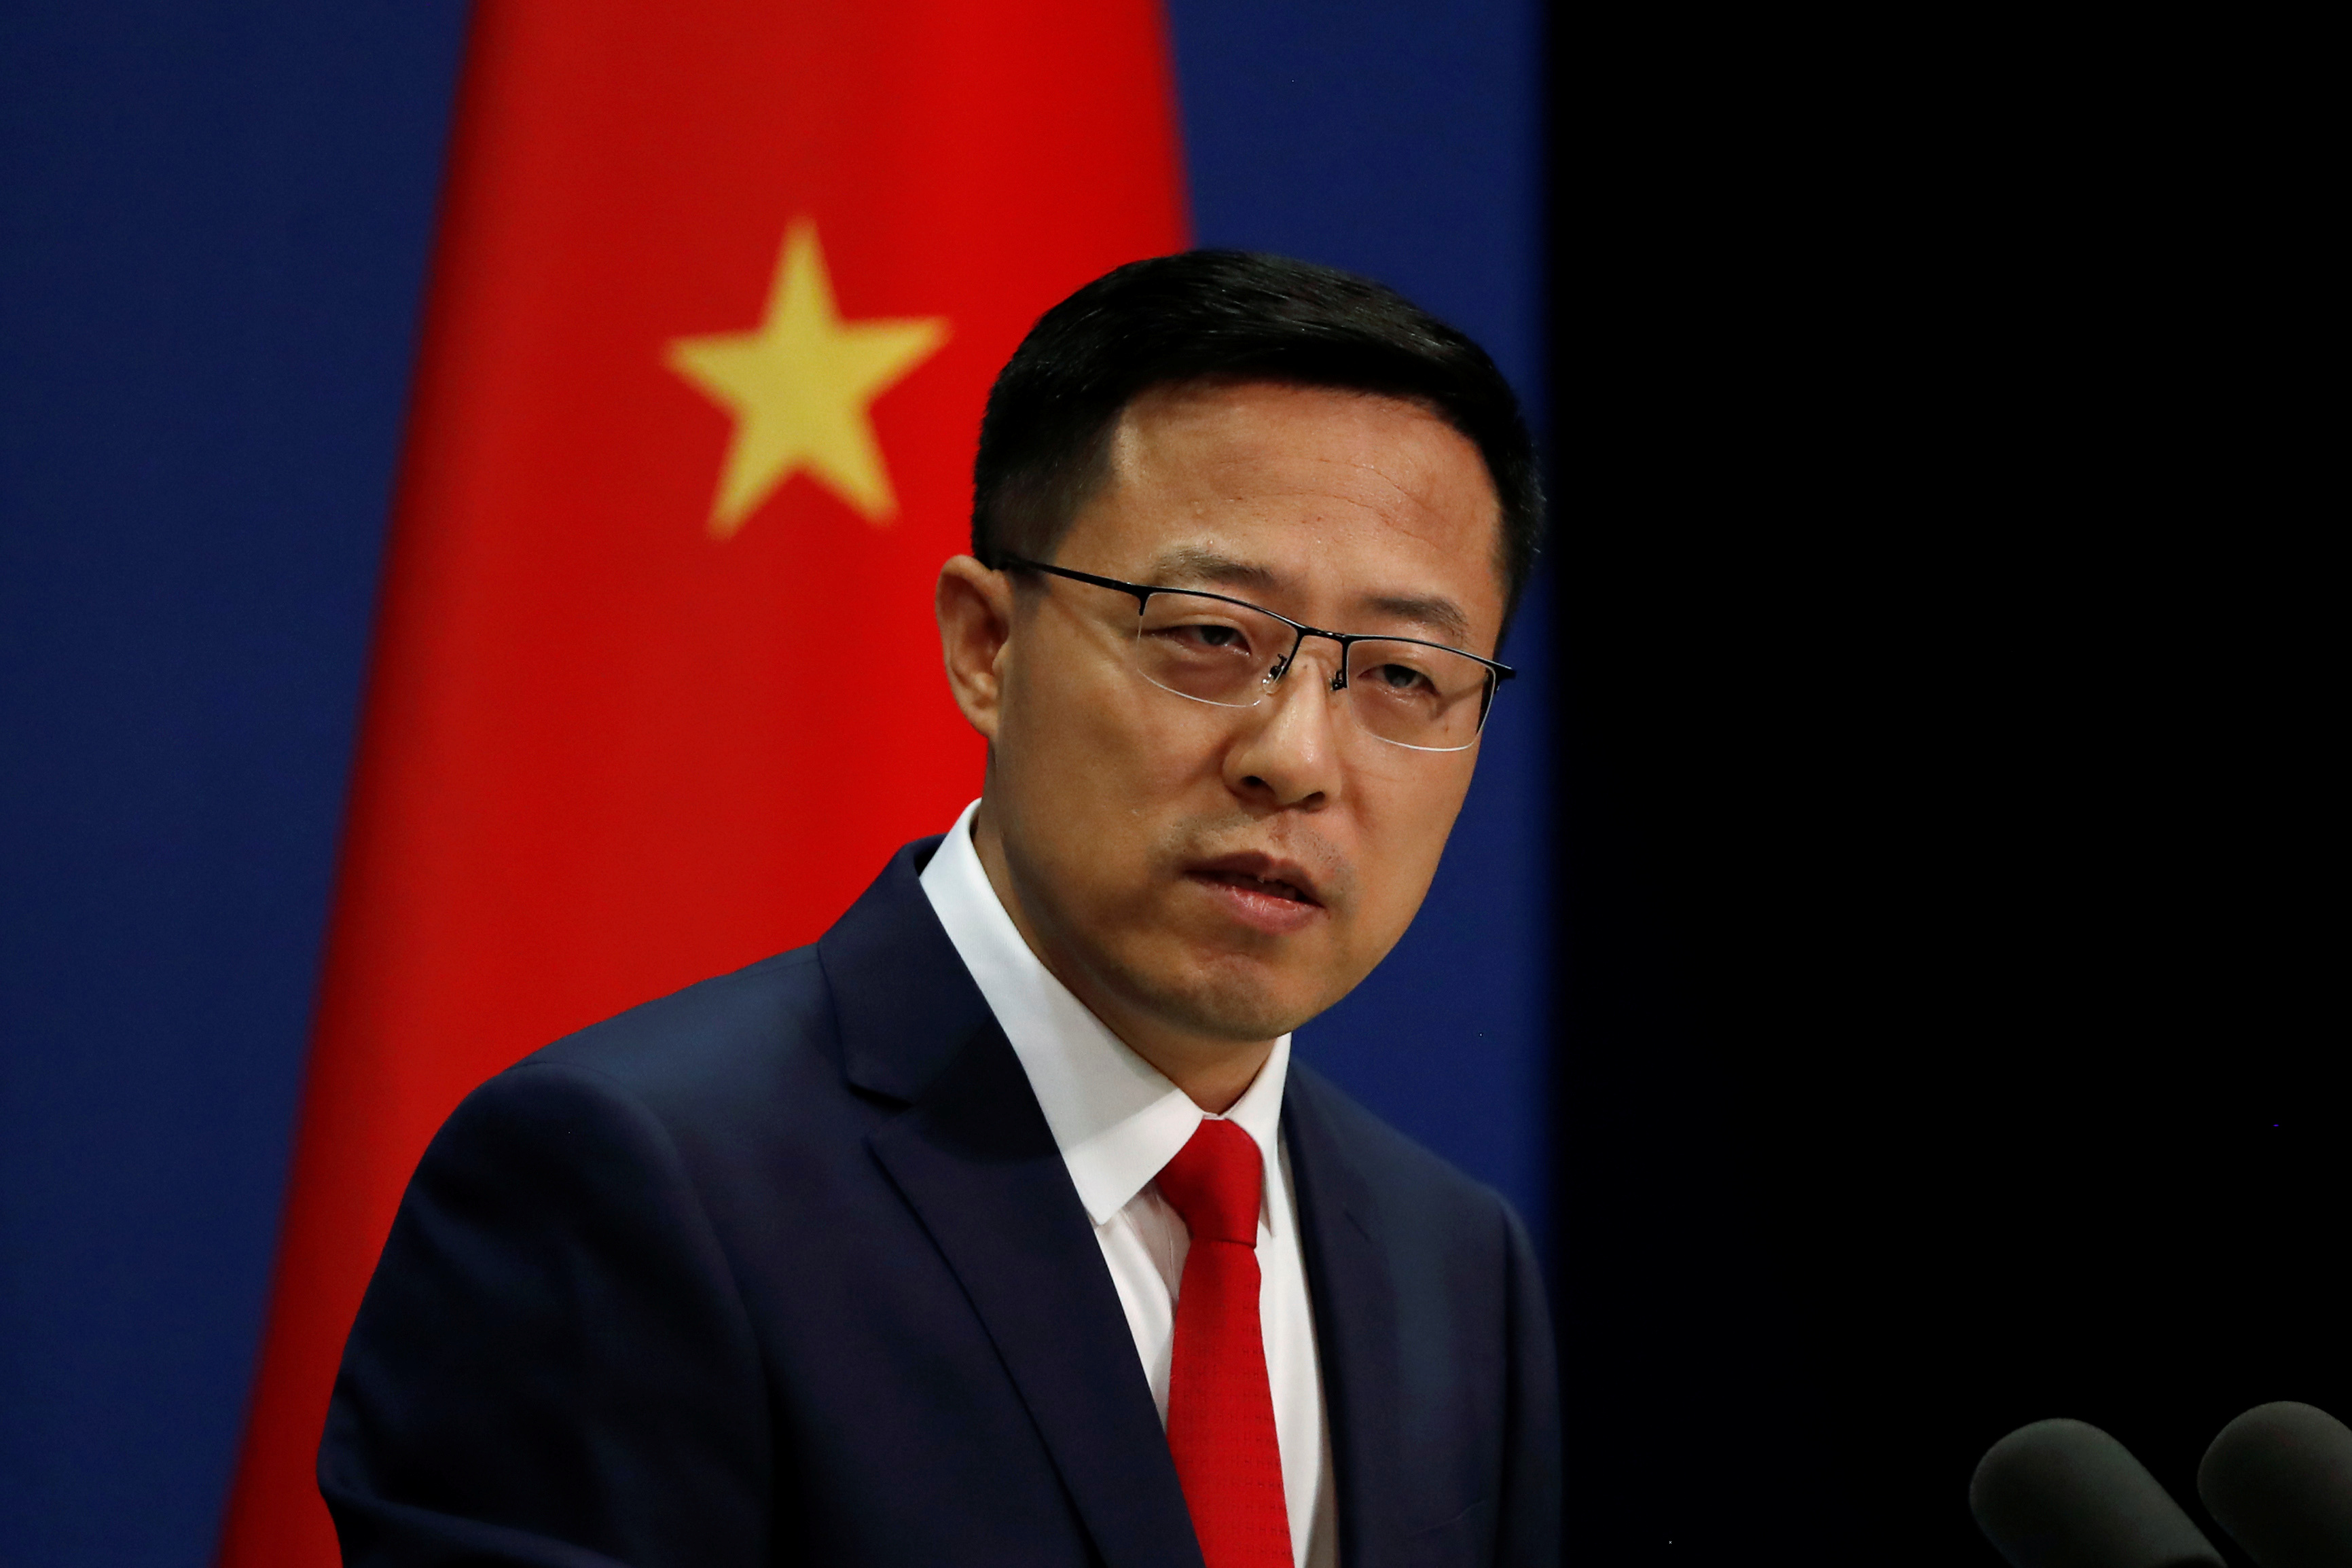 Chinese Foreign Ministry spokesman Zhao Lijian attends a news conference in Beijing, China September 10, 2020. REUTERS/Carlos Garcia Rawlins